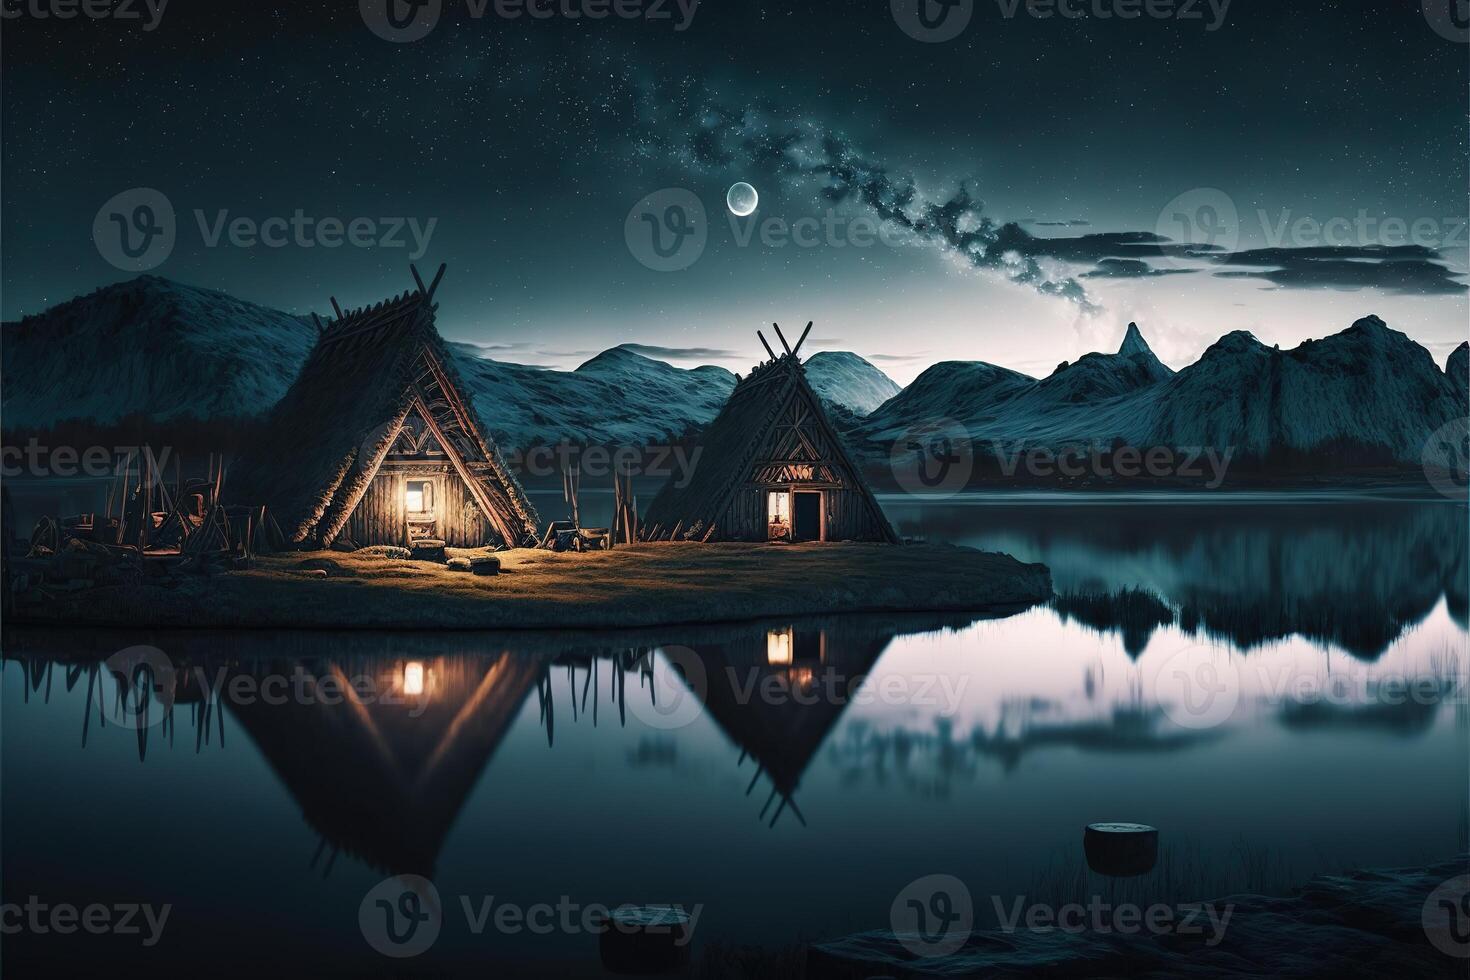 viking houses in a viking landscape by photo